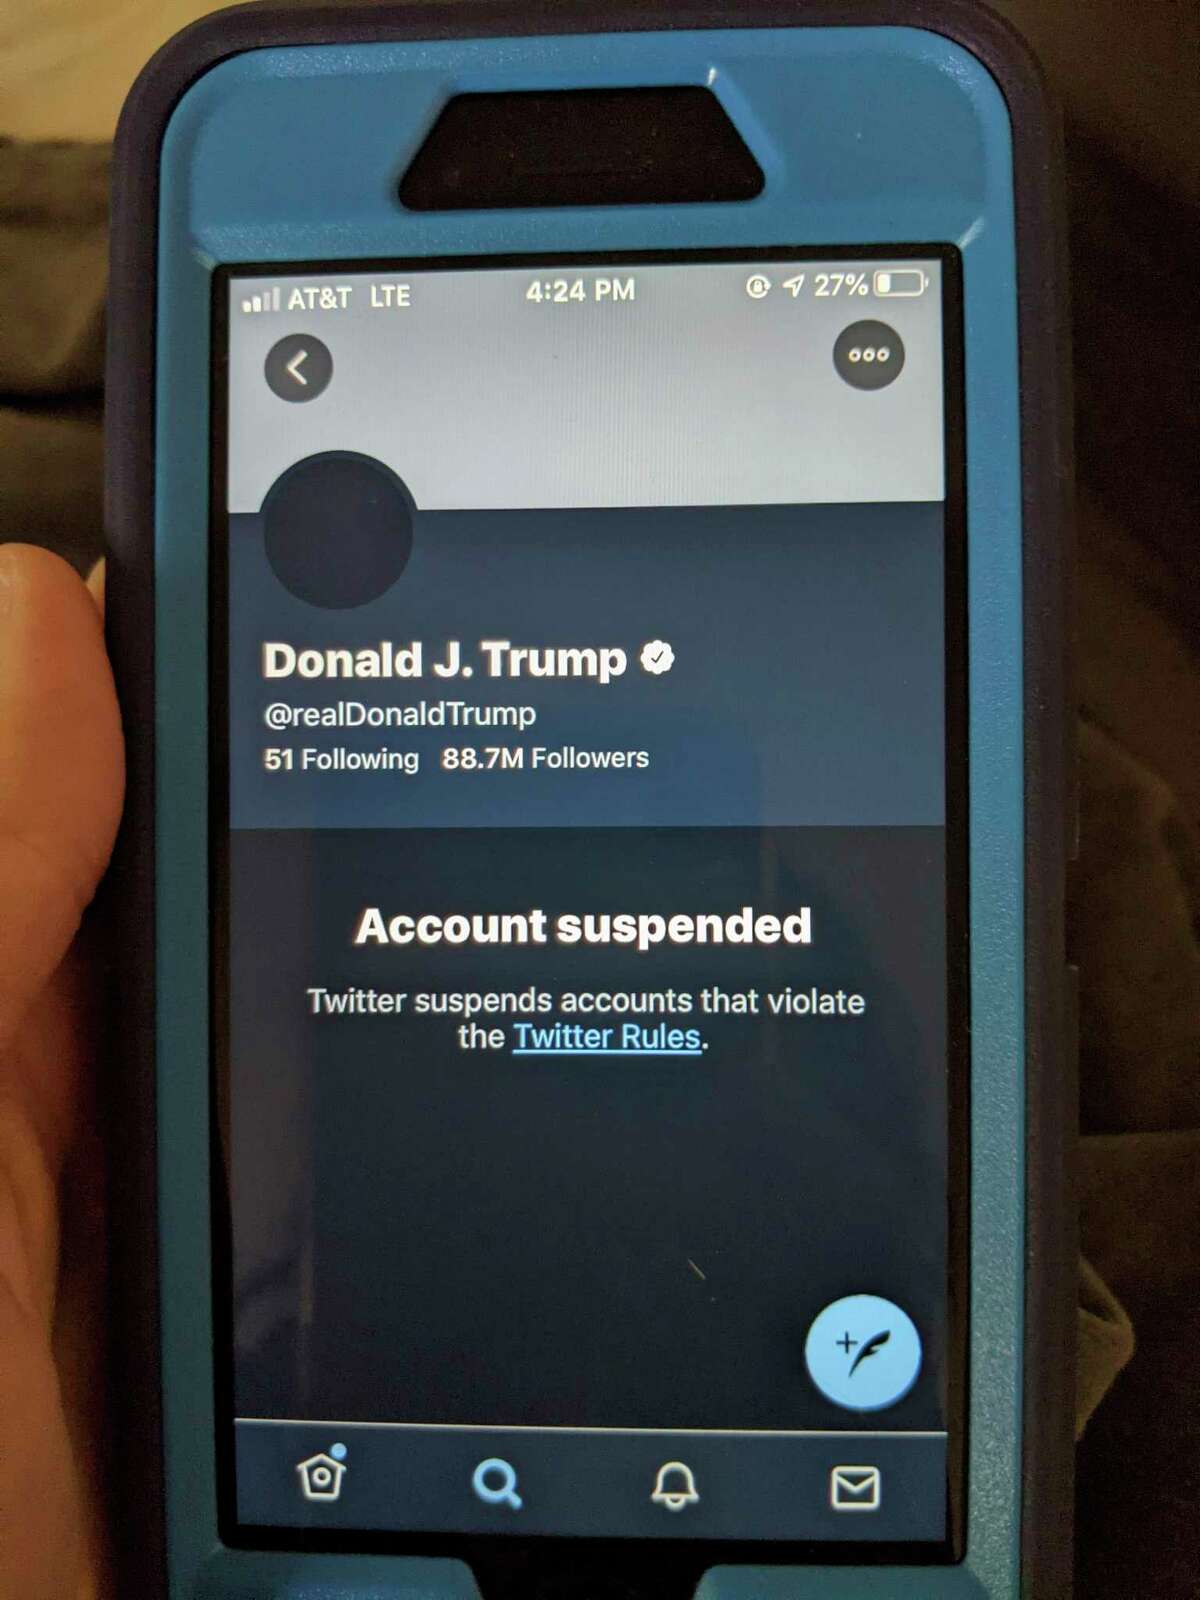 This Friday, Jan. 8, 2021 image shows the suspended Twitter account of President Donald Trump.  Q: But isn’t that censorship? Doesn’t Trump have the right to freedom of speech? A: Yes, Trump has the right to say whatever he wants (within some limits), but Twitter does not have to allow him to say it on its platform. Governmental entities may not restrict a person’s rights to say what he or she wants under the First Amendment to the U.S. Constitution, but private companies have discretion. “Social media platforms are private companies, and can censor what people post on their websites as they see fit,” wrote Lata Nott, executive director of the First Amendment Center.” All social media sites have expressed policies against the promotion of violence and Twitter, as stated above, saw the president’s tweets as violations of those terms of service.